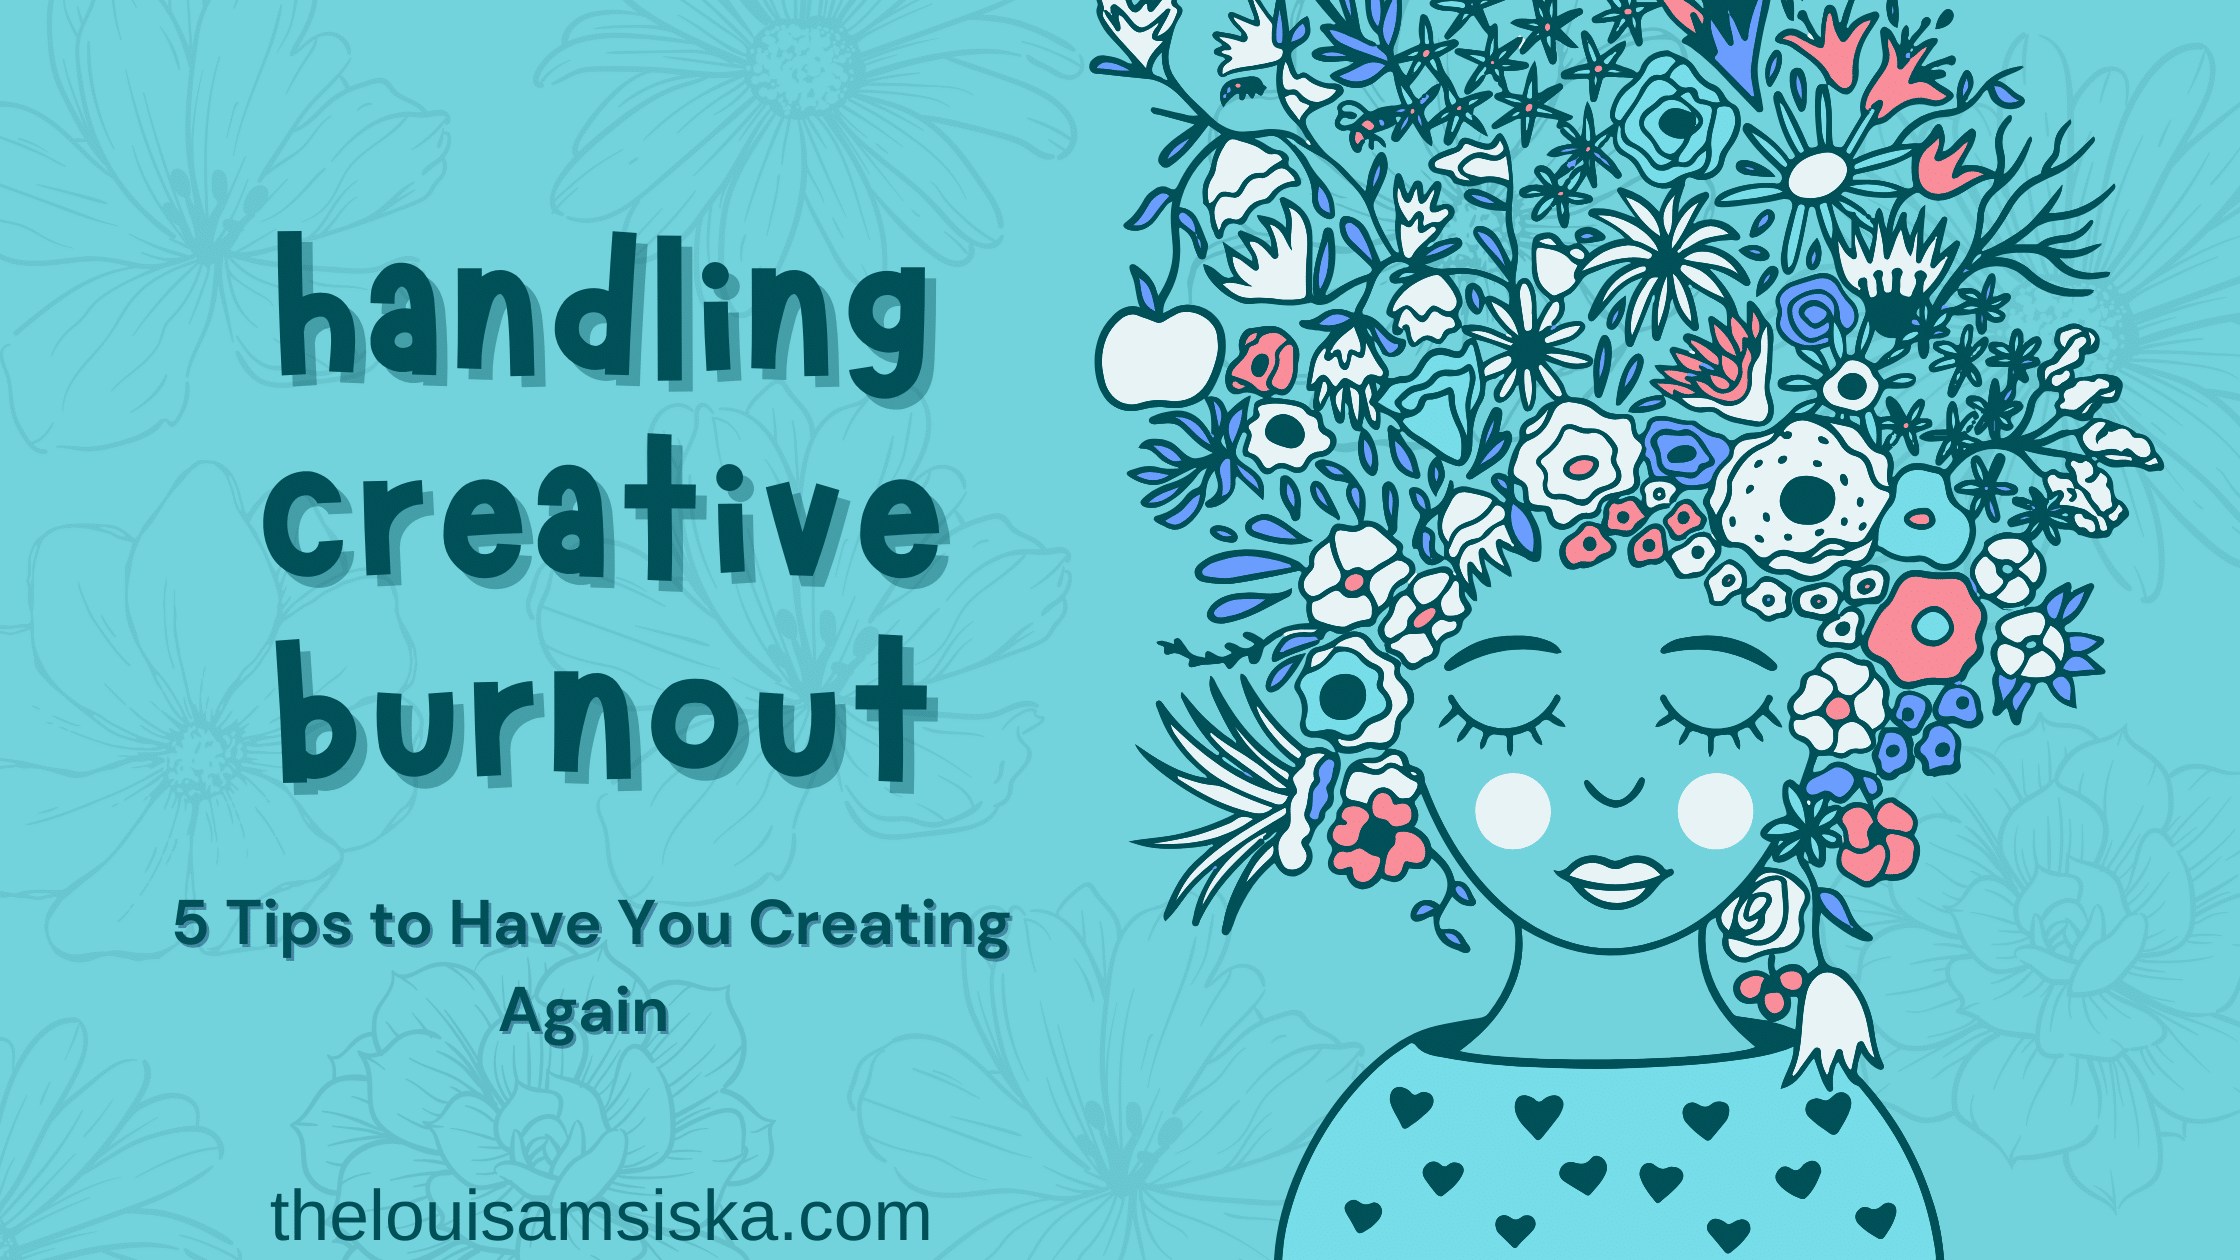 How to Effectively Handle Creative Burnout: 5 Ways that Work